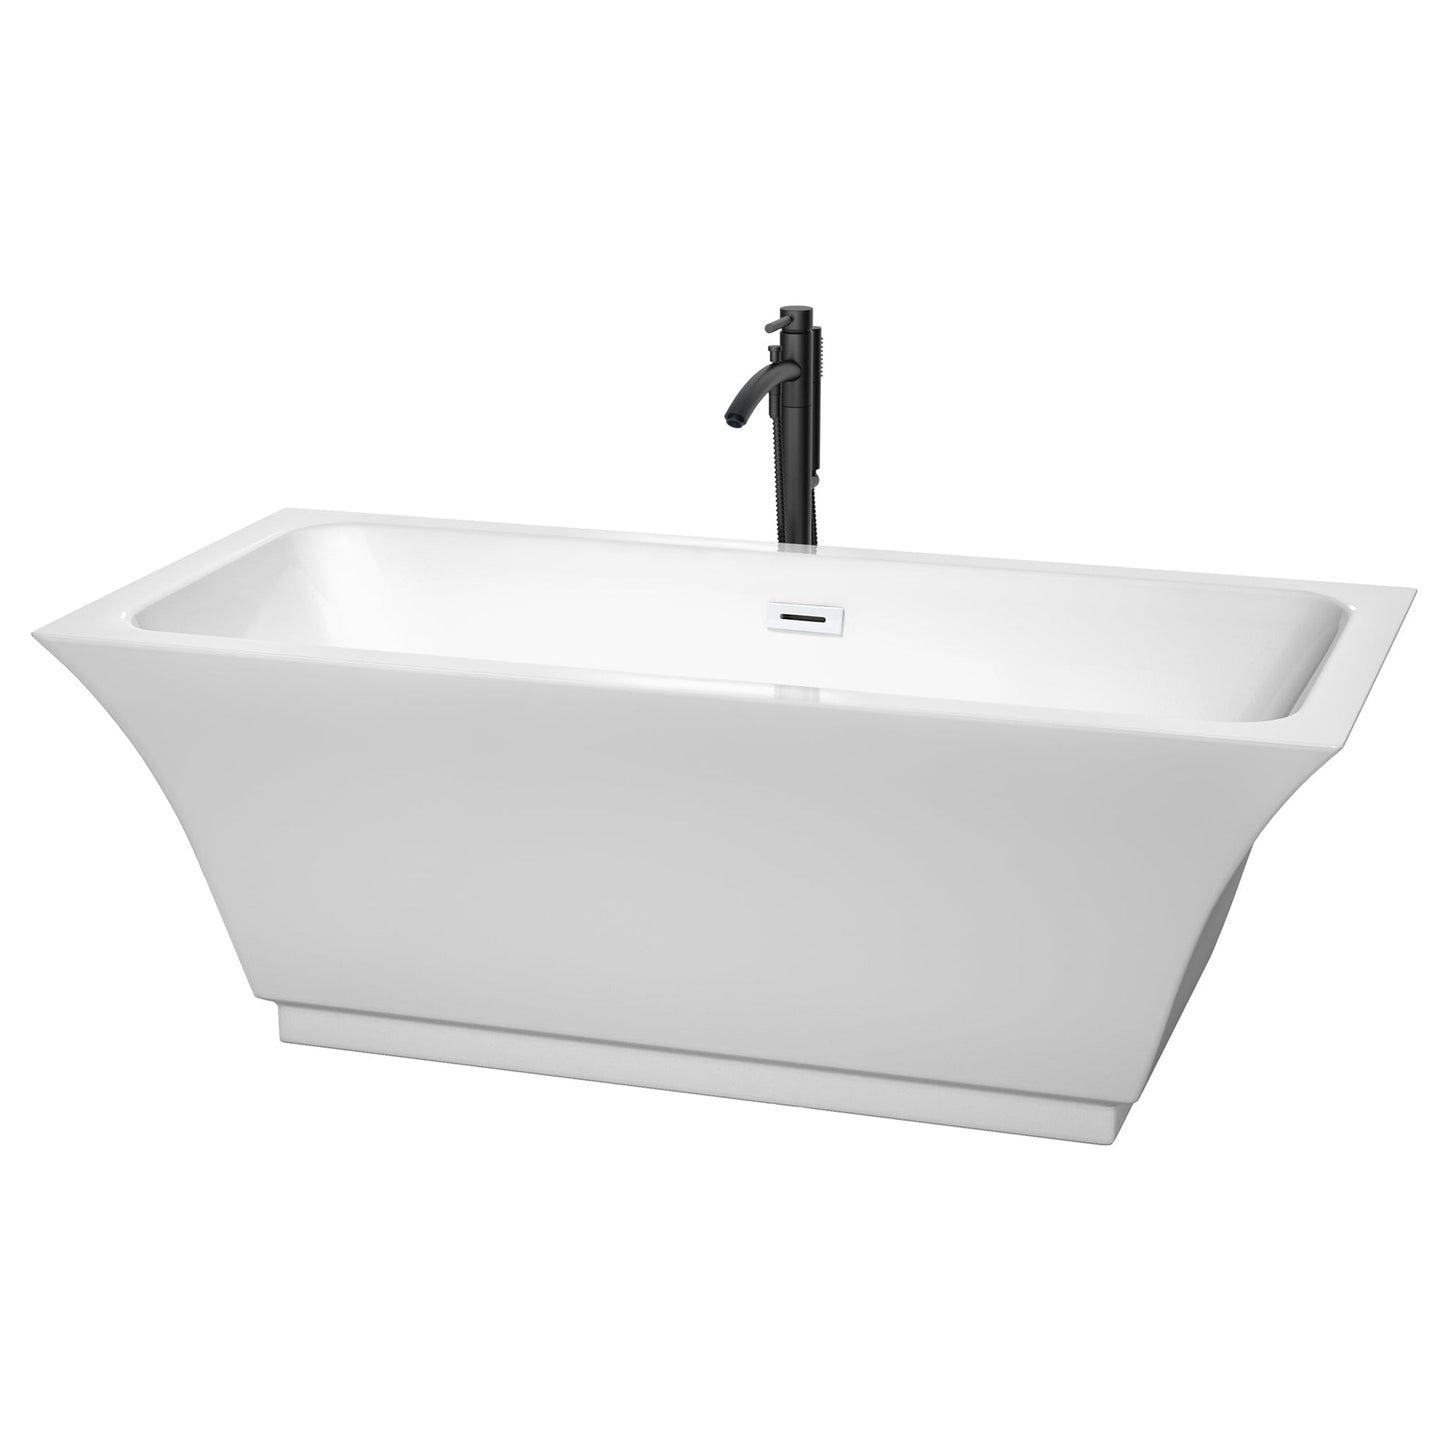 Wyndham Collection Galina 67" Freestanding Bathtub in White With Shiny White Trim and Floor Mounted Faucet in Matte Black